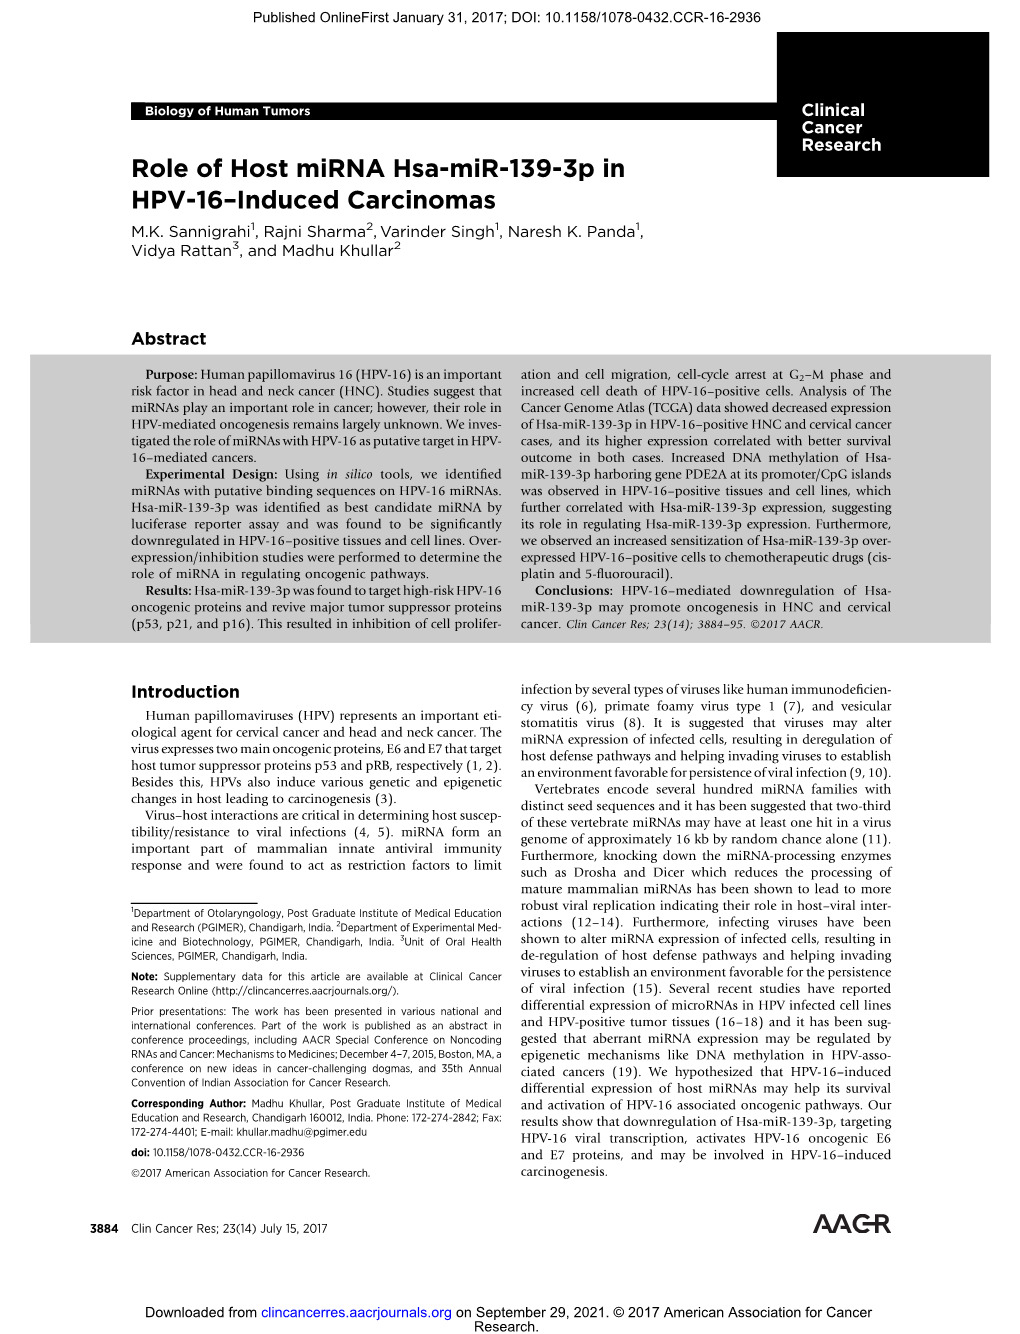 Role of Host Mirna Hsa-Mir-139-3P in HPV-16–Induced Carcinomas M.K